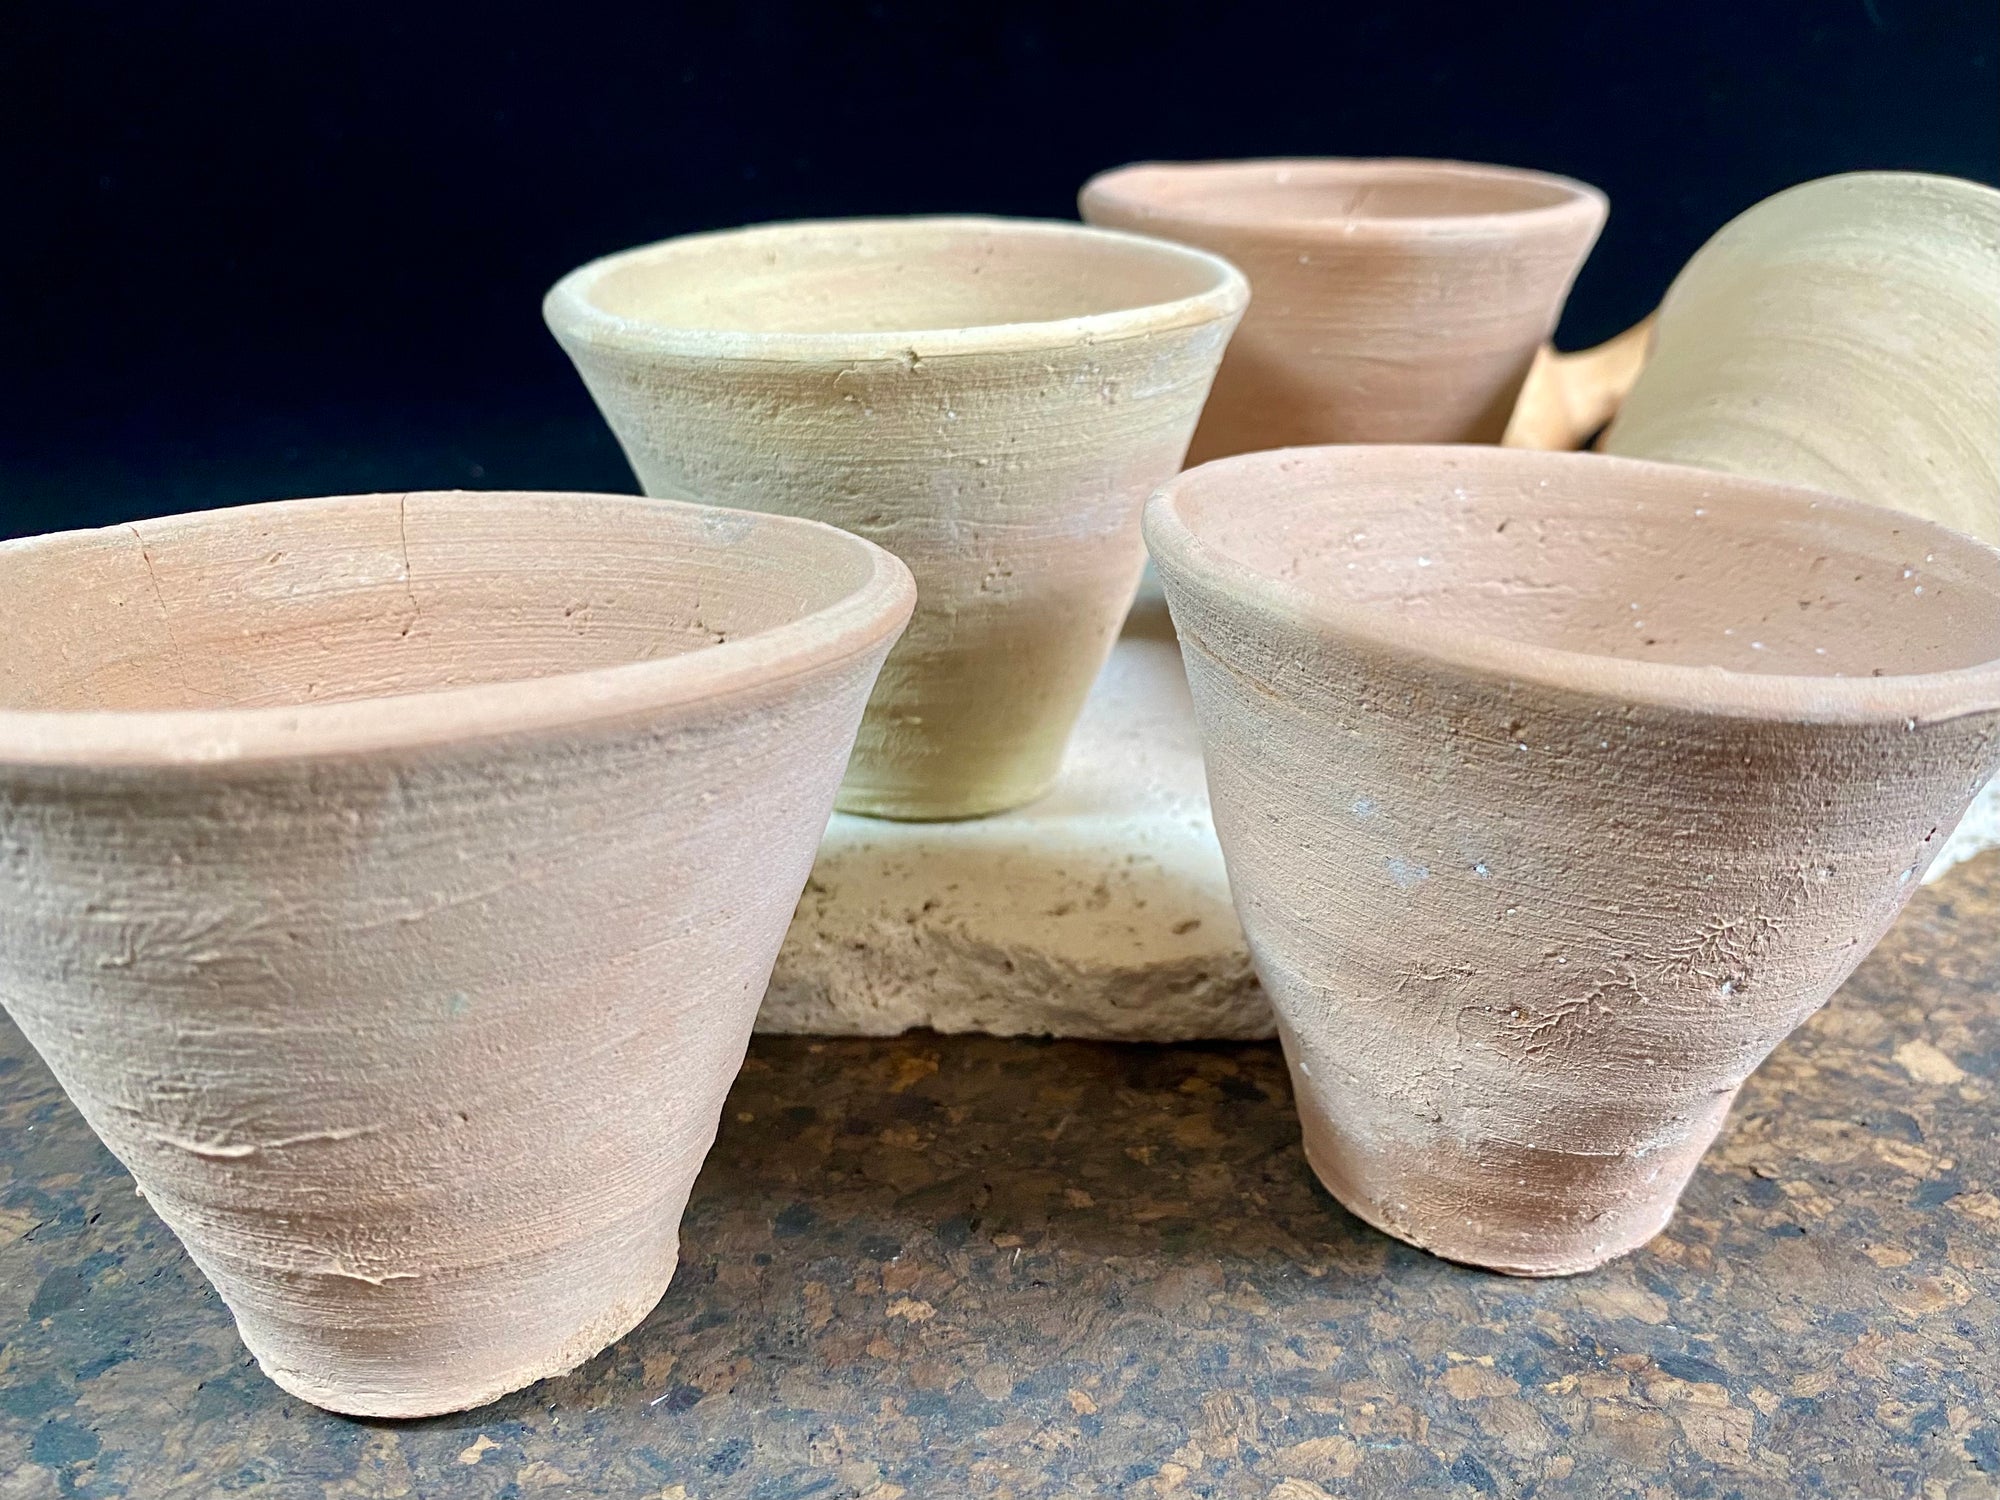 Traditional Indian chai cups made from unglazed terracotta, called a Kullad. As well as tea cups, they make beautiful offering bowls, are perfect for holding incense sticks or tea lights. They can also be used as small decorative pots for plants. Set of ten, priced at $3 per cup. Height 6.5 cm height